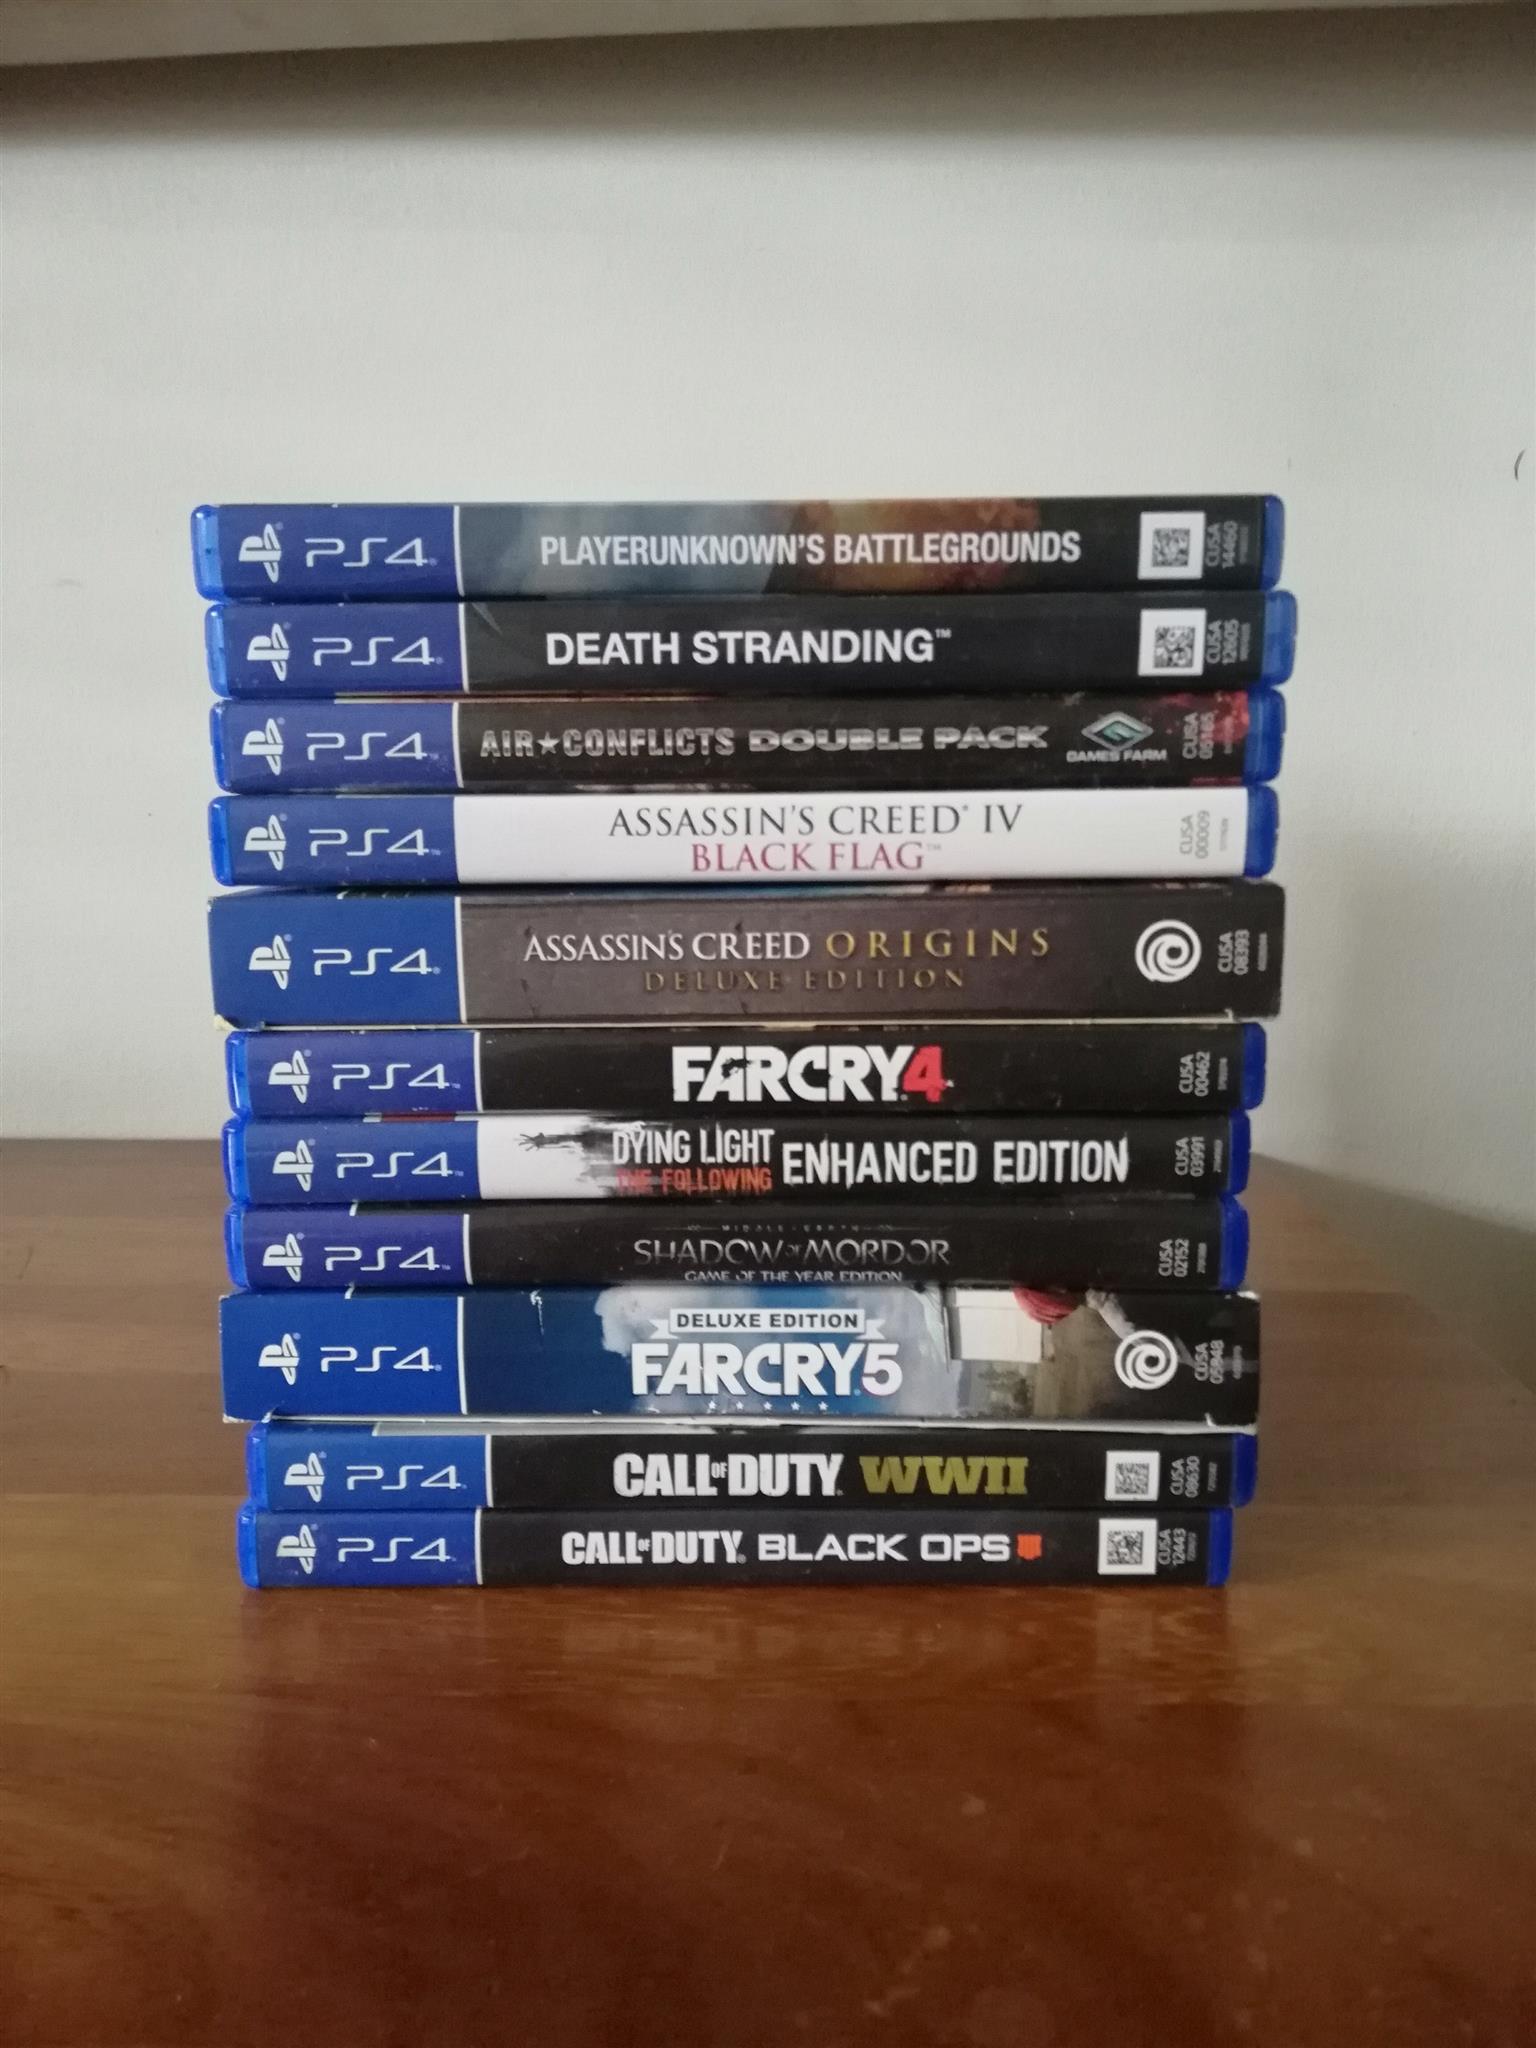 Playstation 4 with games